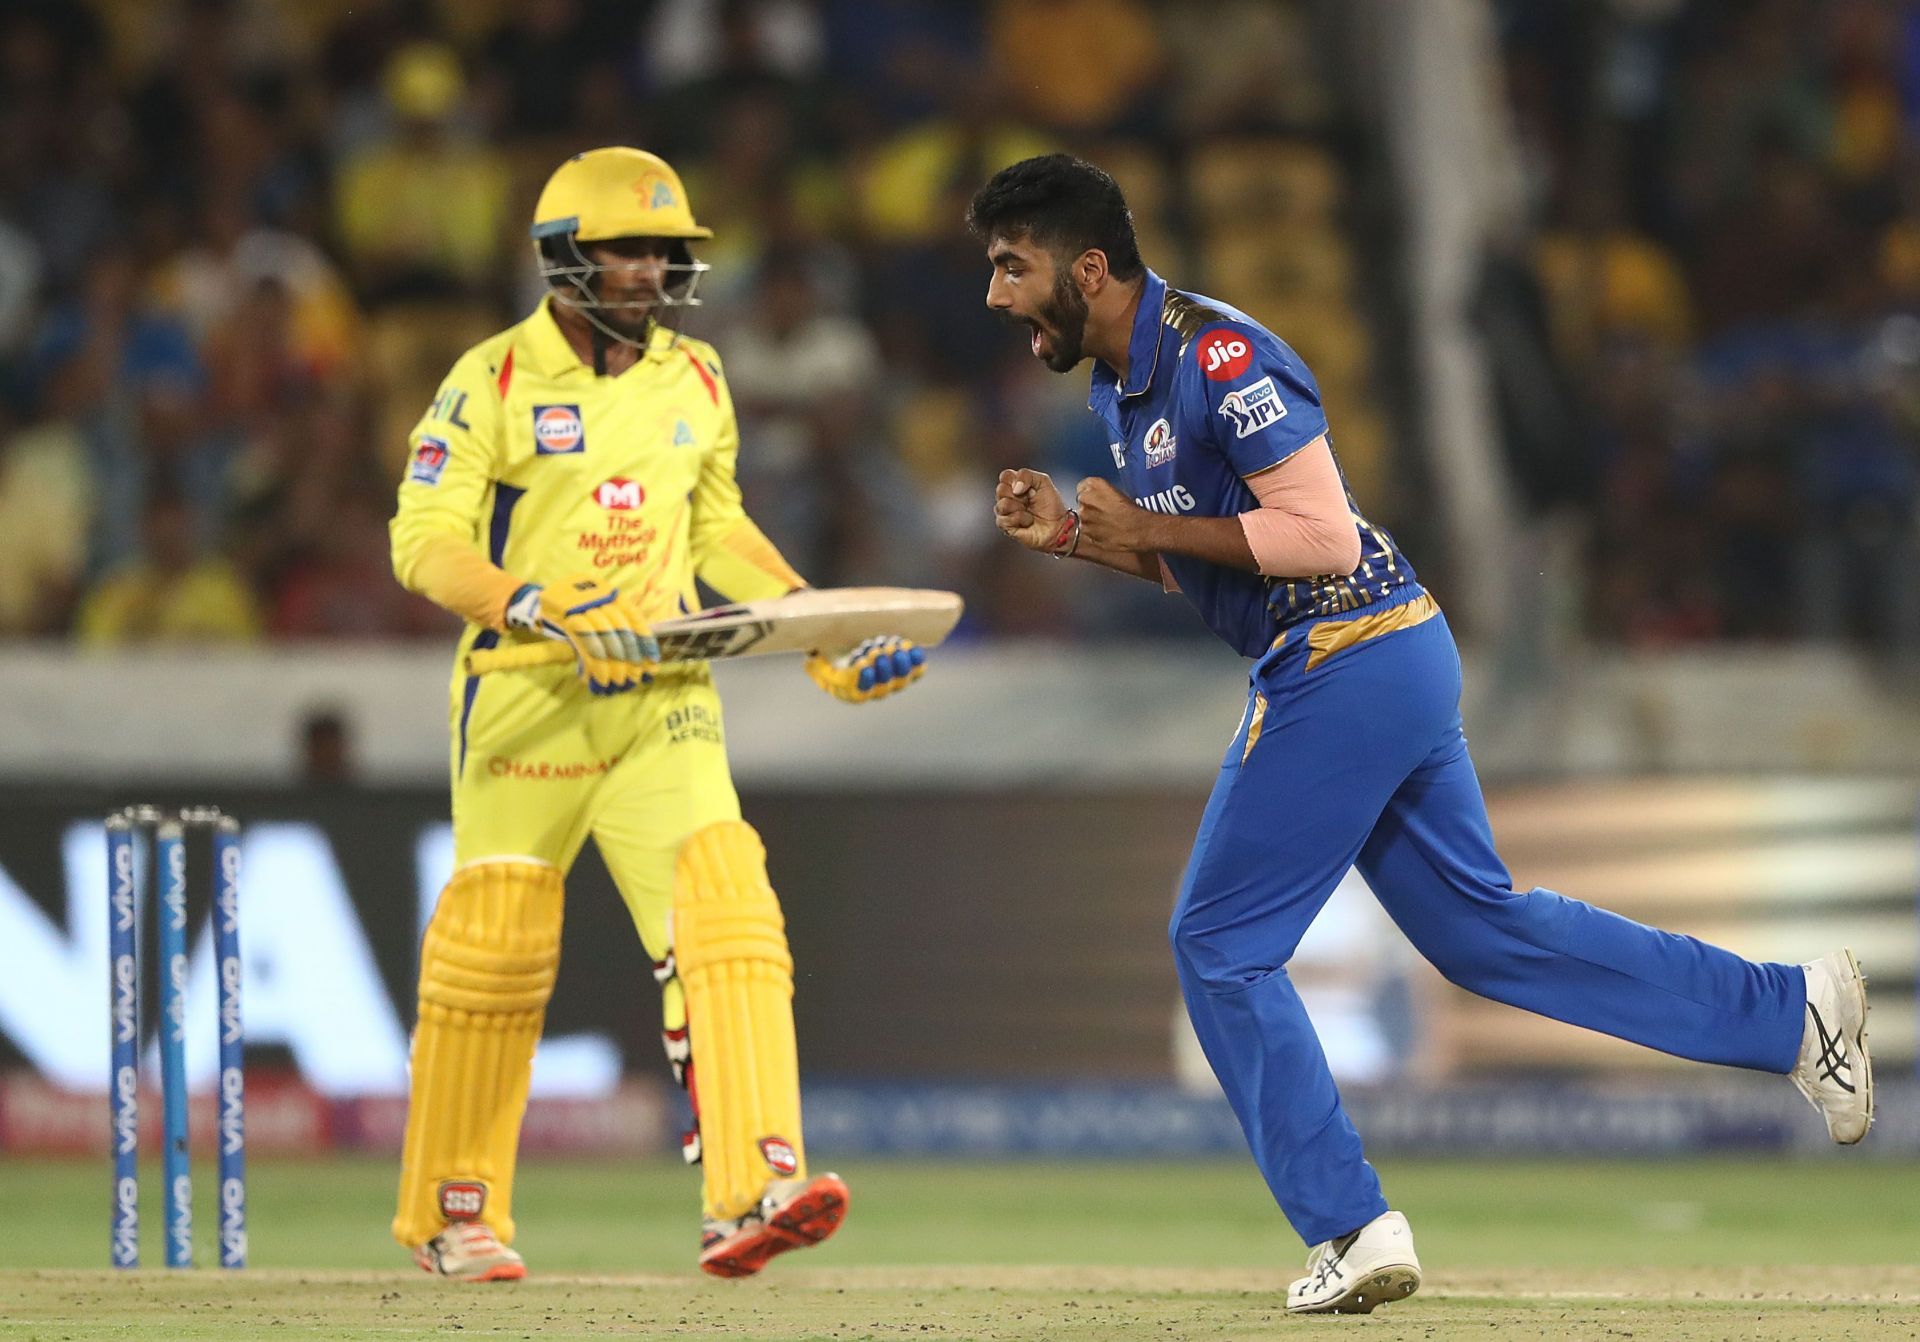 Jasprit Bumrah in action in the IPL.